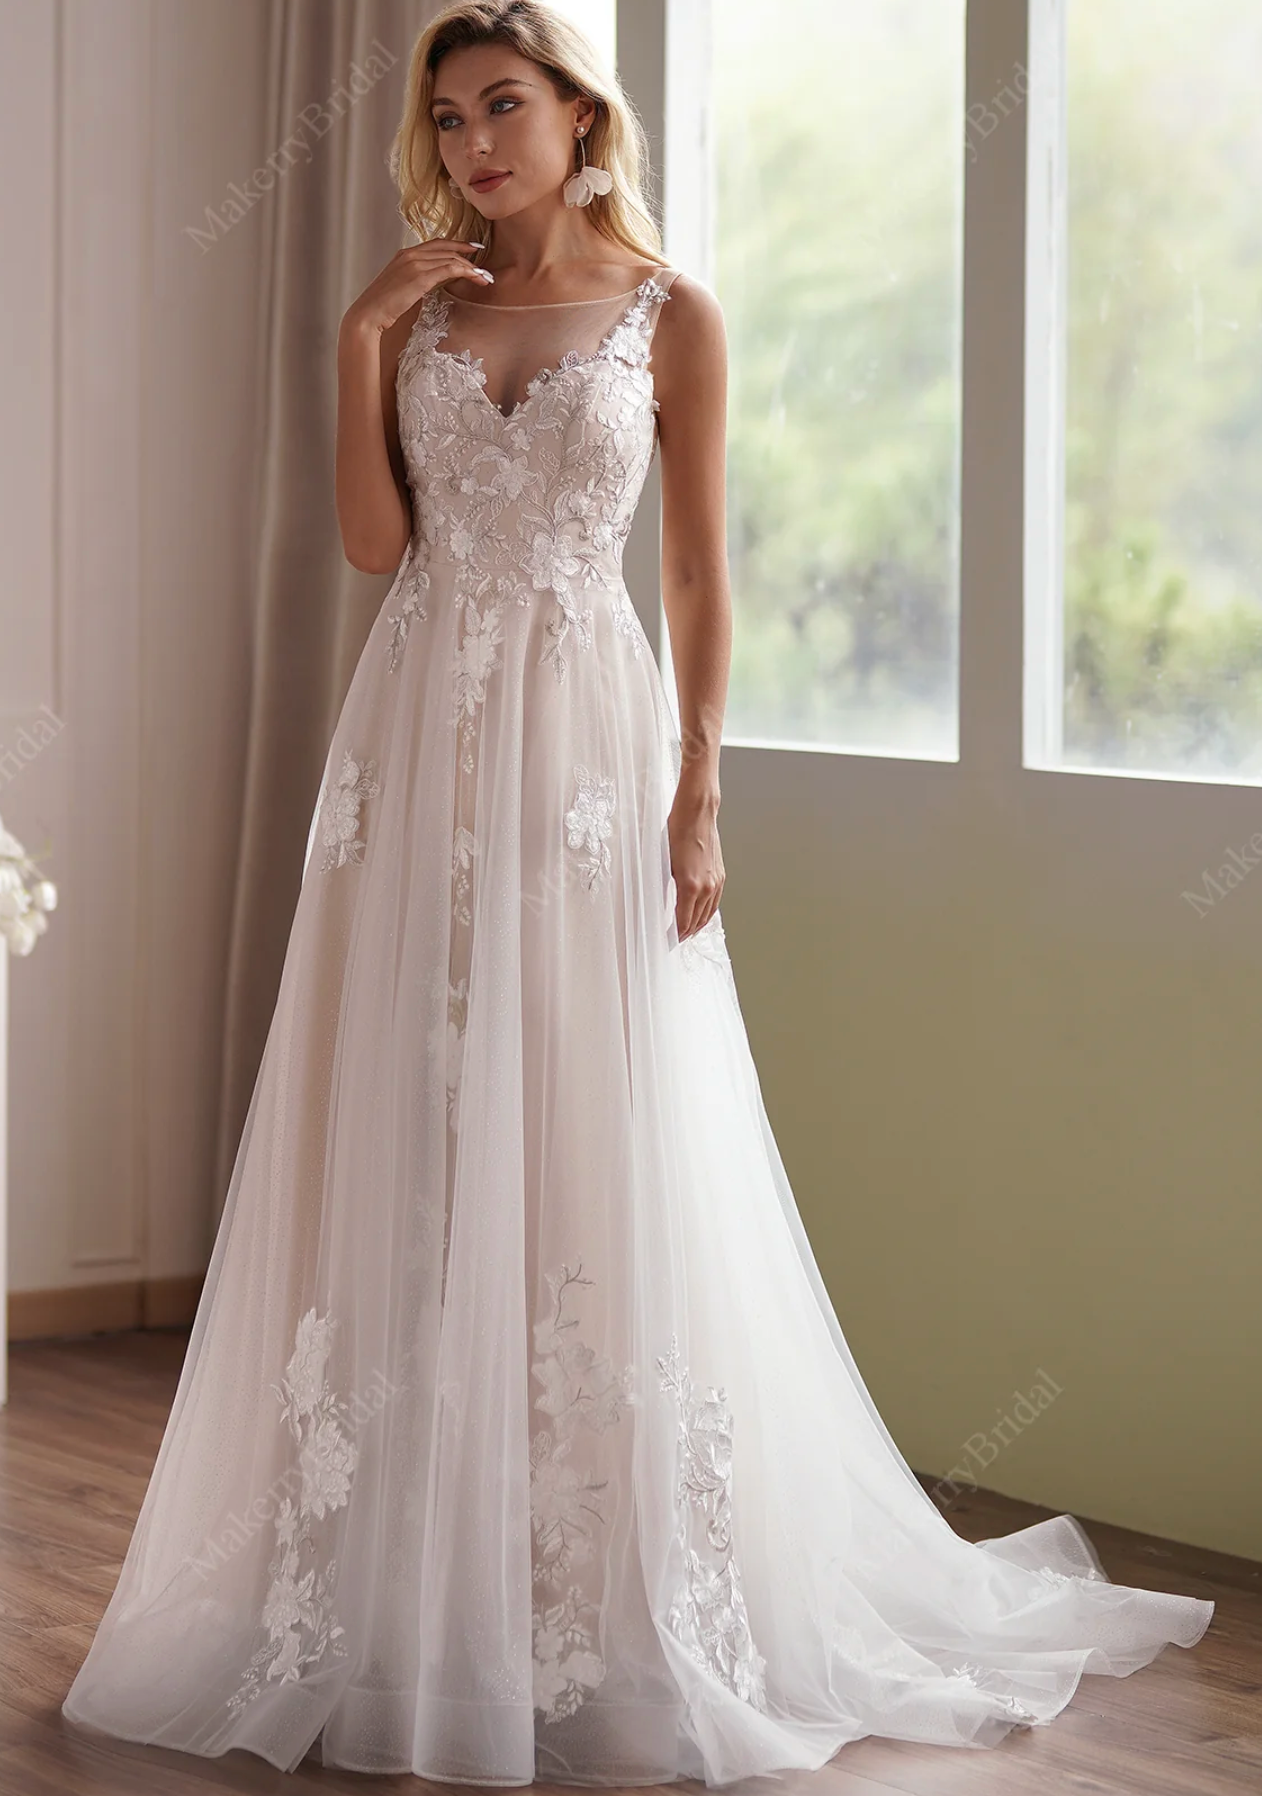 Load image into Gallery viewer, Romantic Beaded Lace Illusion Back Bridal Gown
